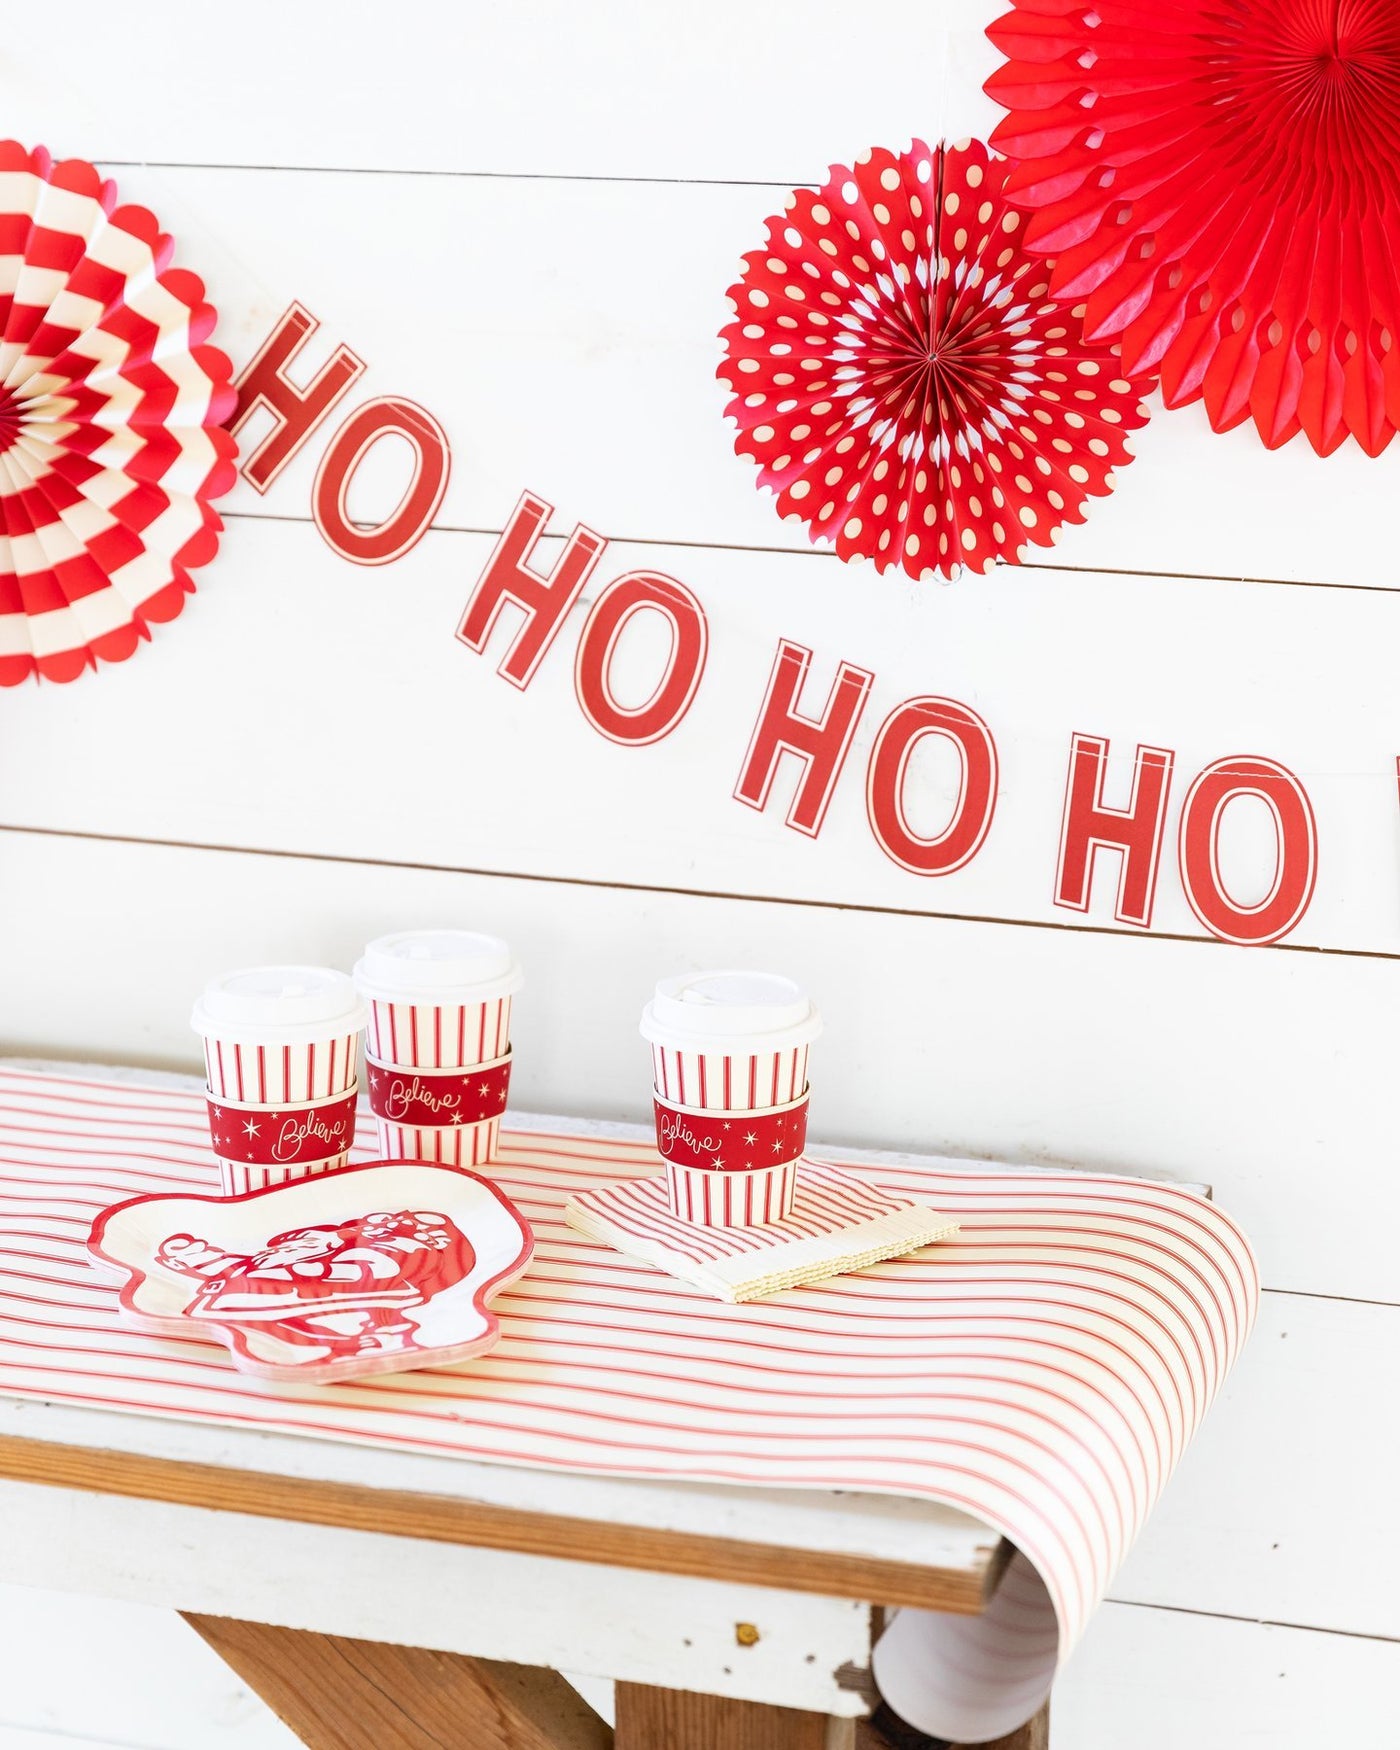 Believe red and white table runner on table with festive holiday drinks and Ho Ho Ho banner